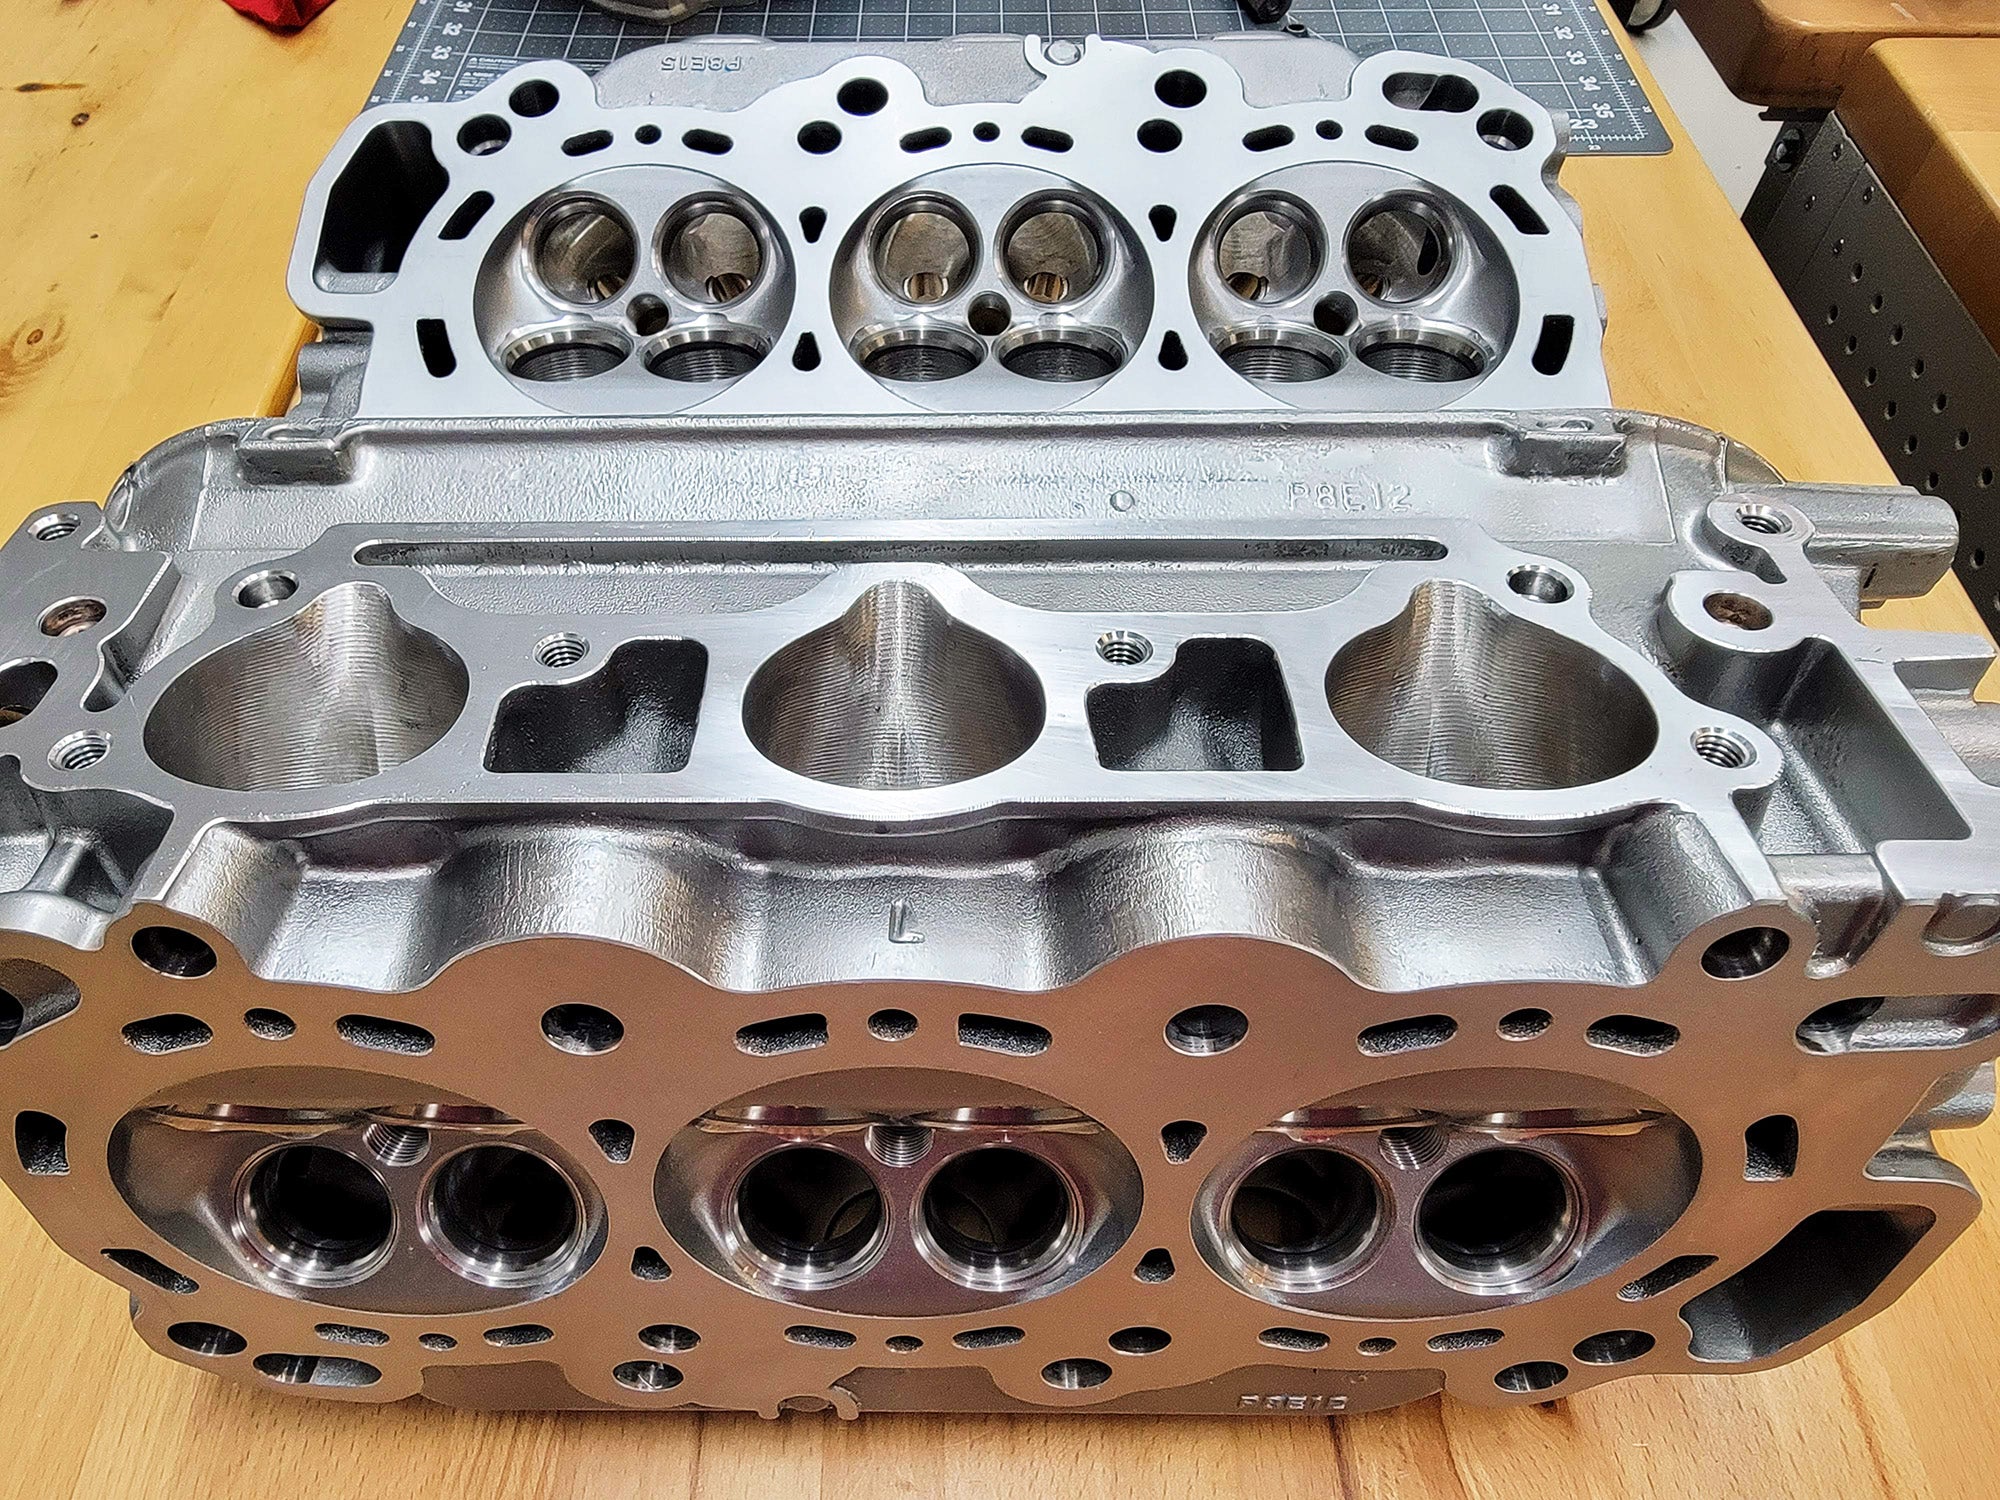 J Series CNC Ported Cylinder Heads - Black Friday Special